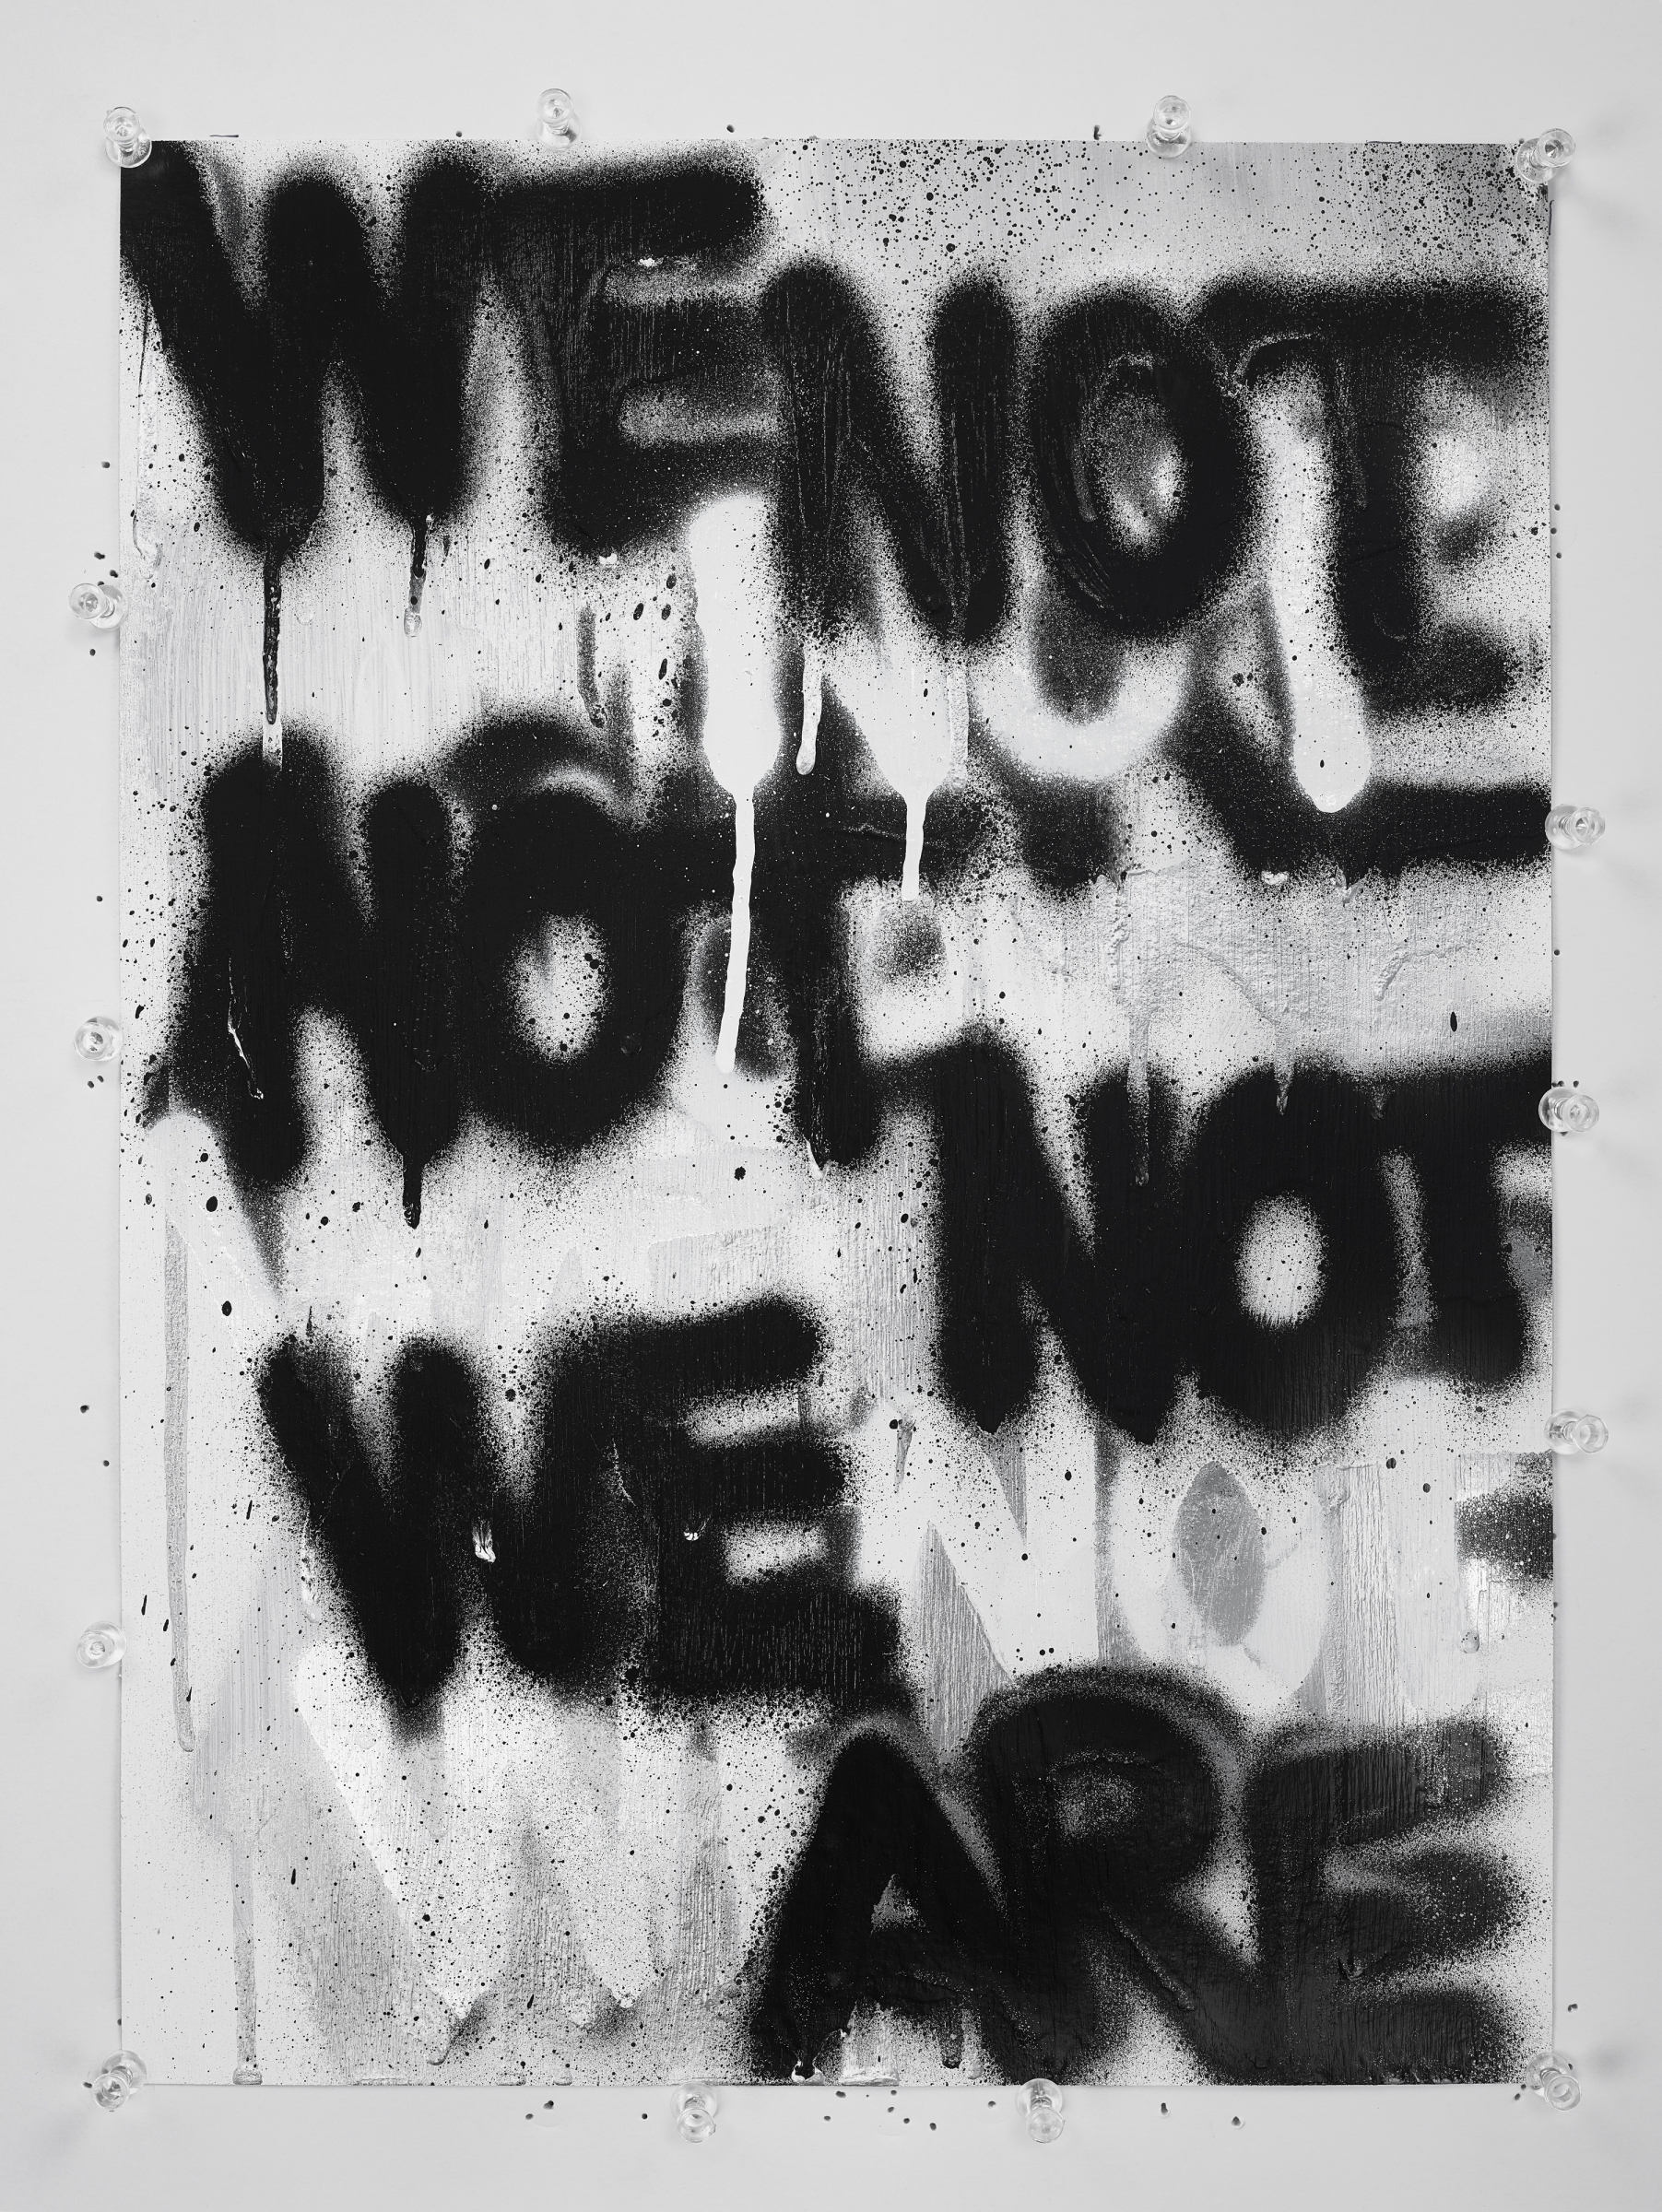 Spray paint original for&amp;nbsp;Untitled (WE ARE NOT), 2020, spray paint on paper